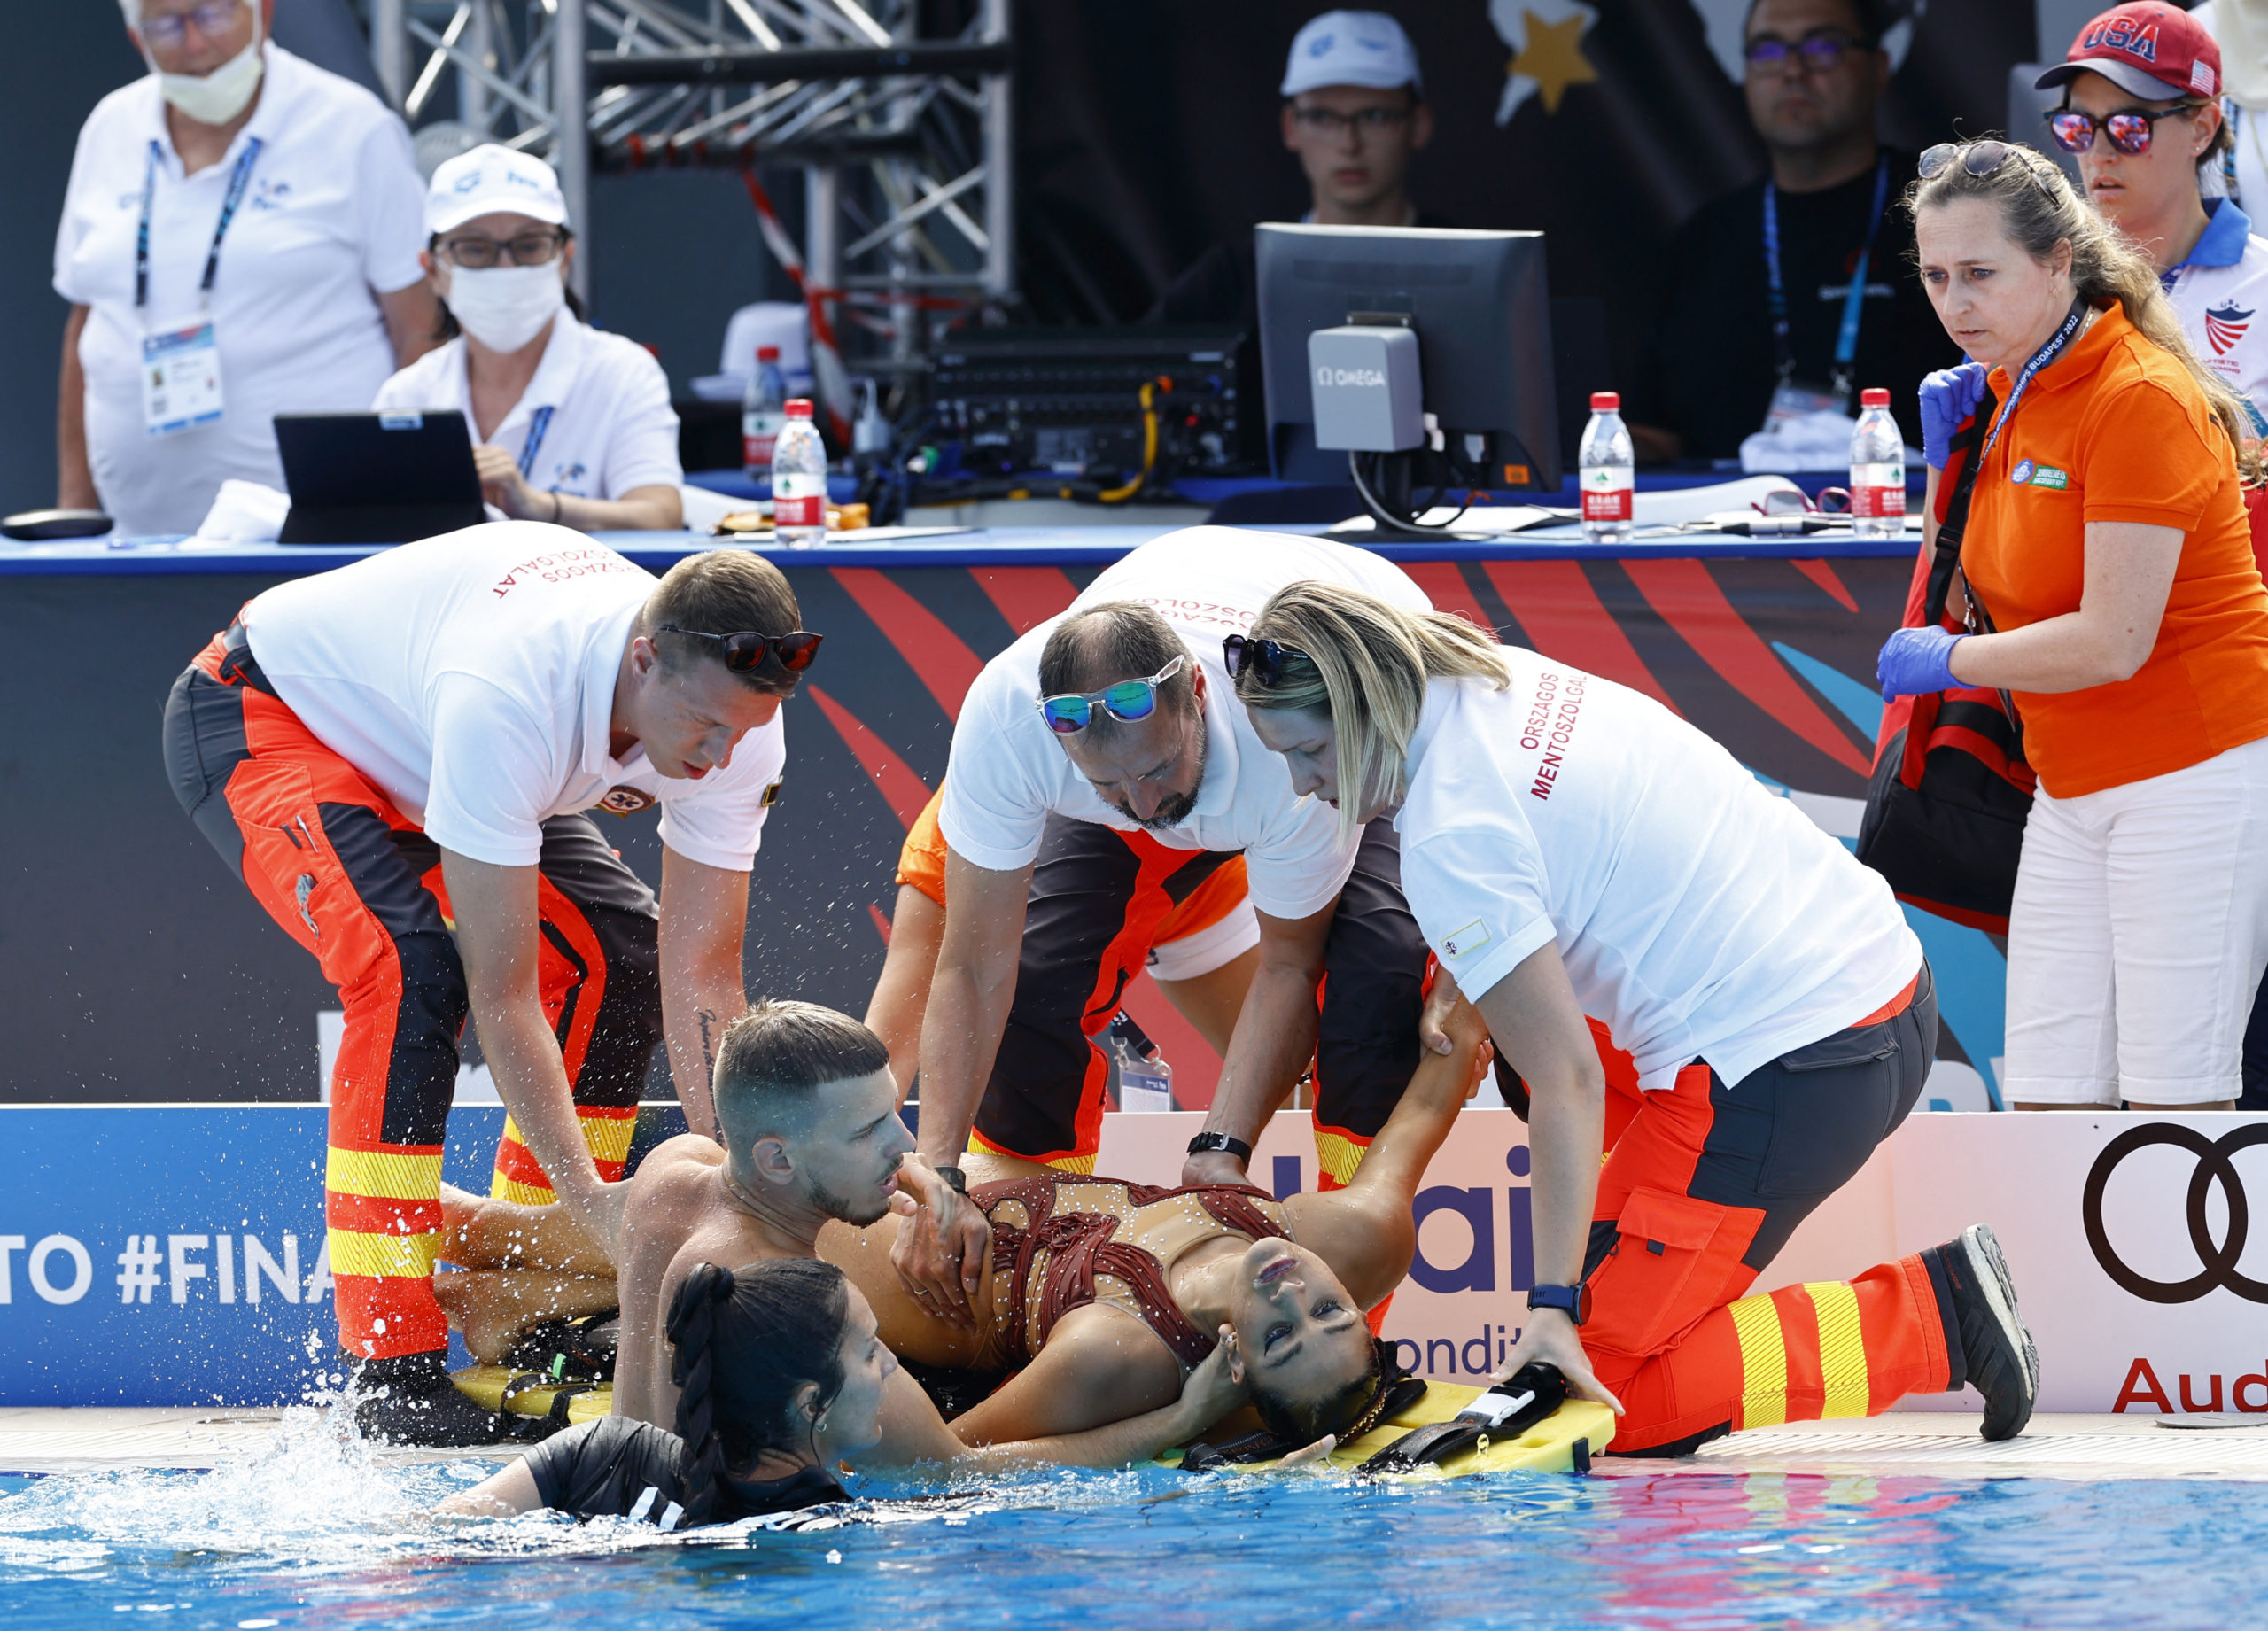 Anita Alvarez of the U.S. receives medical attention during the women's solo free final 